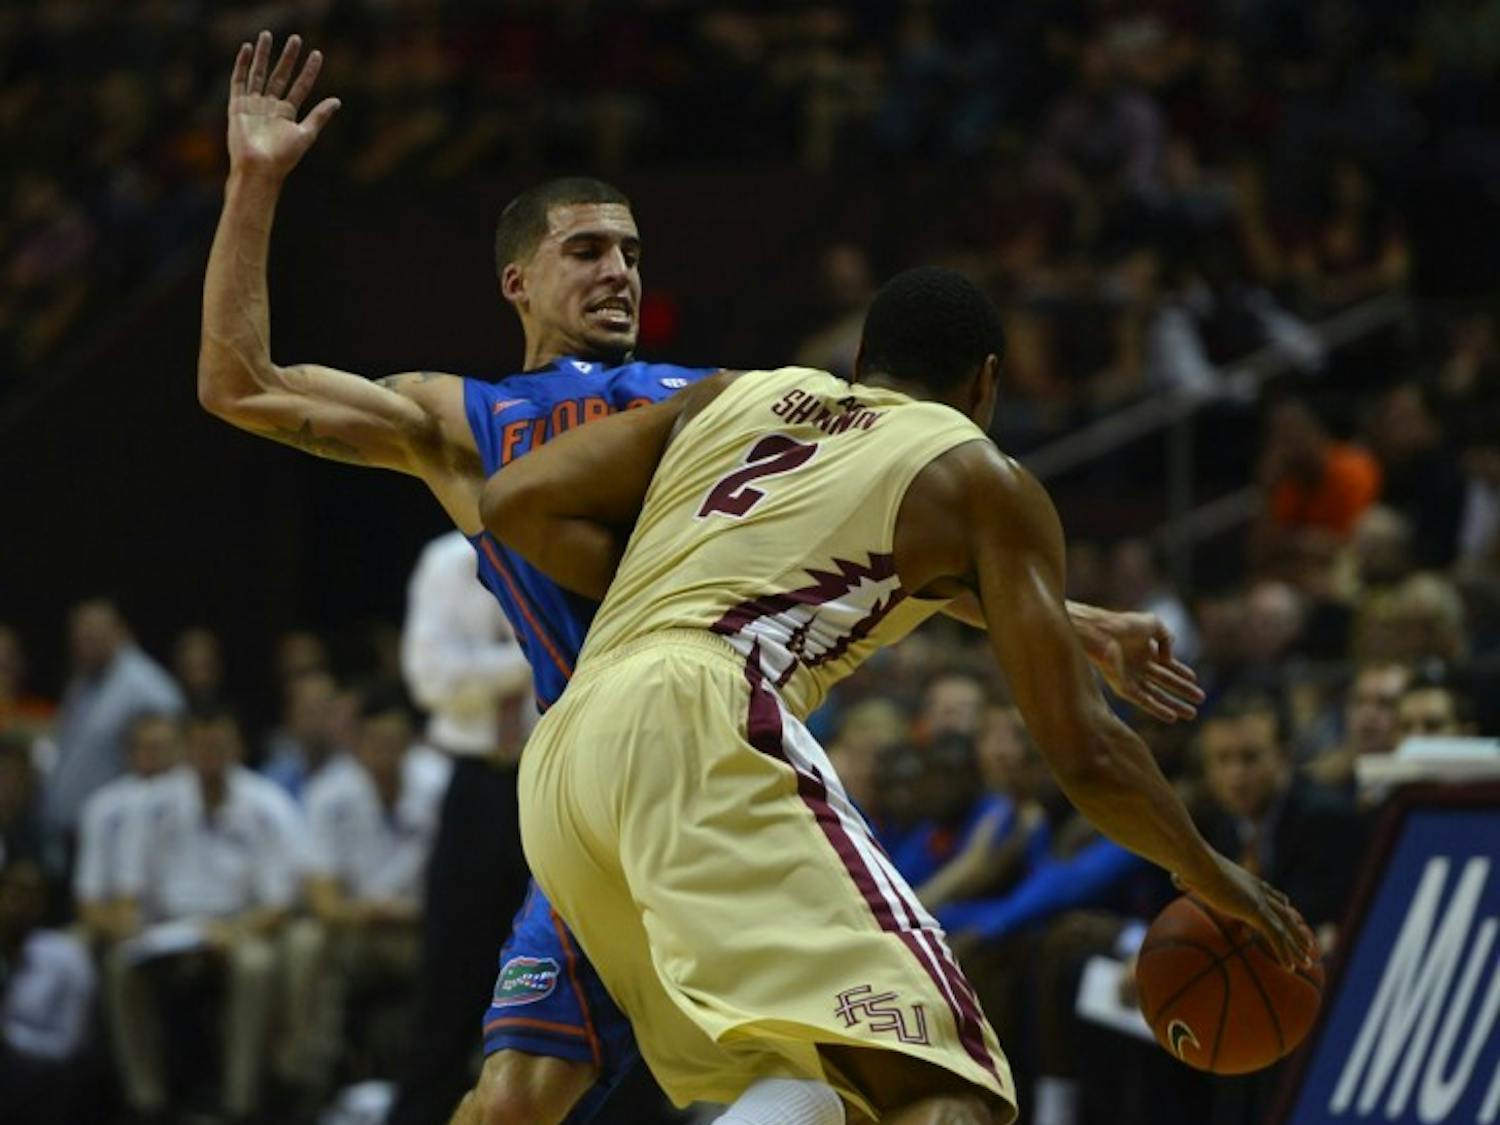 Junior guard Scottie Wilbekin blocks Florida State forward Terrance Shannon during Florida's 72-47 win against Florida State in Tallahassee on Wednesday, Dec. 5, 2012.